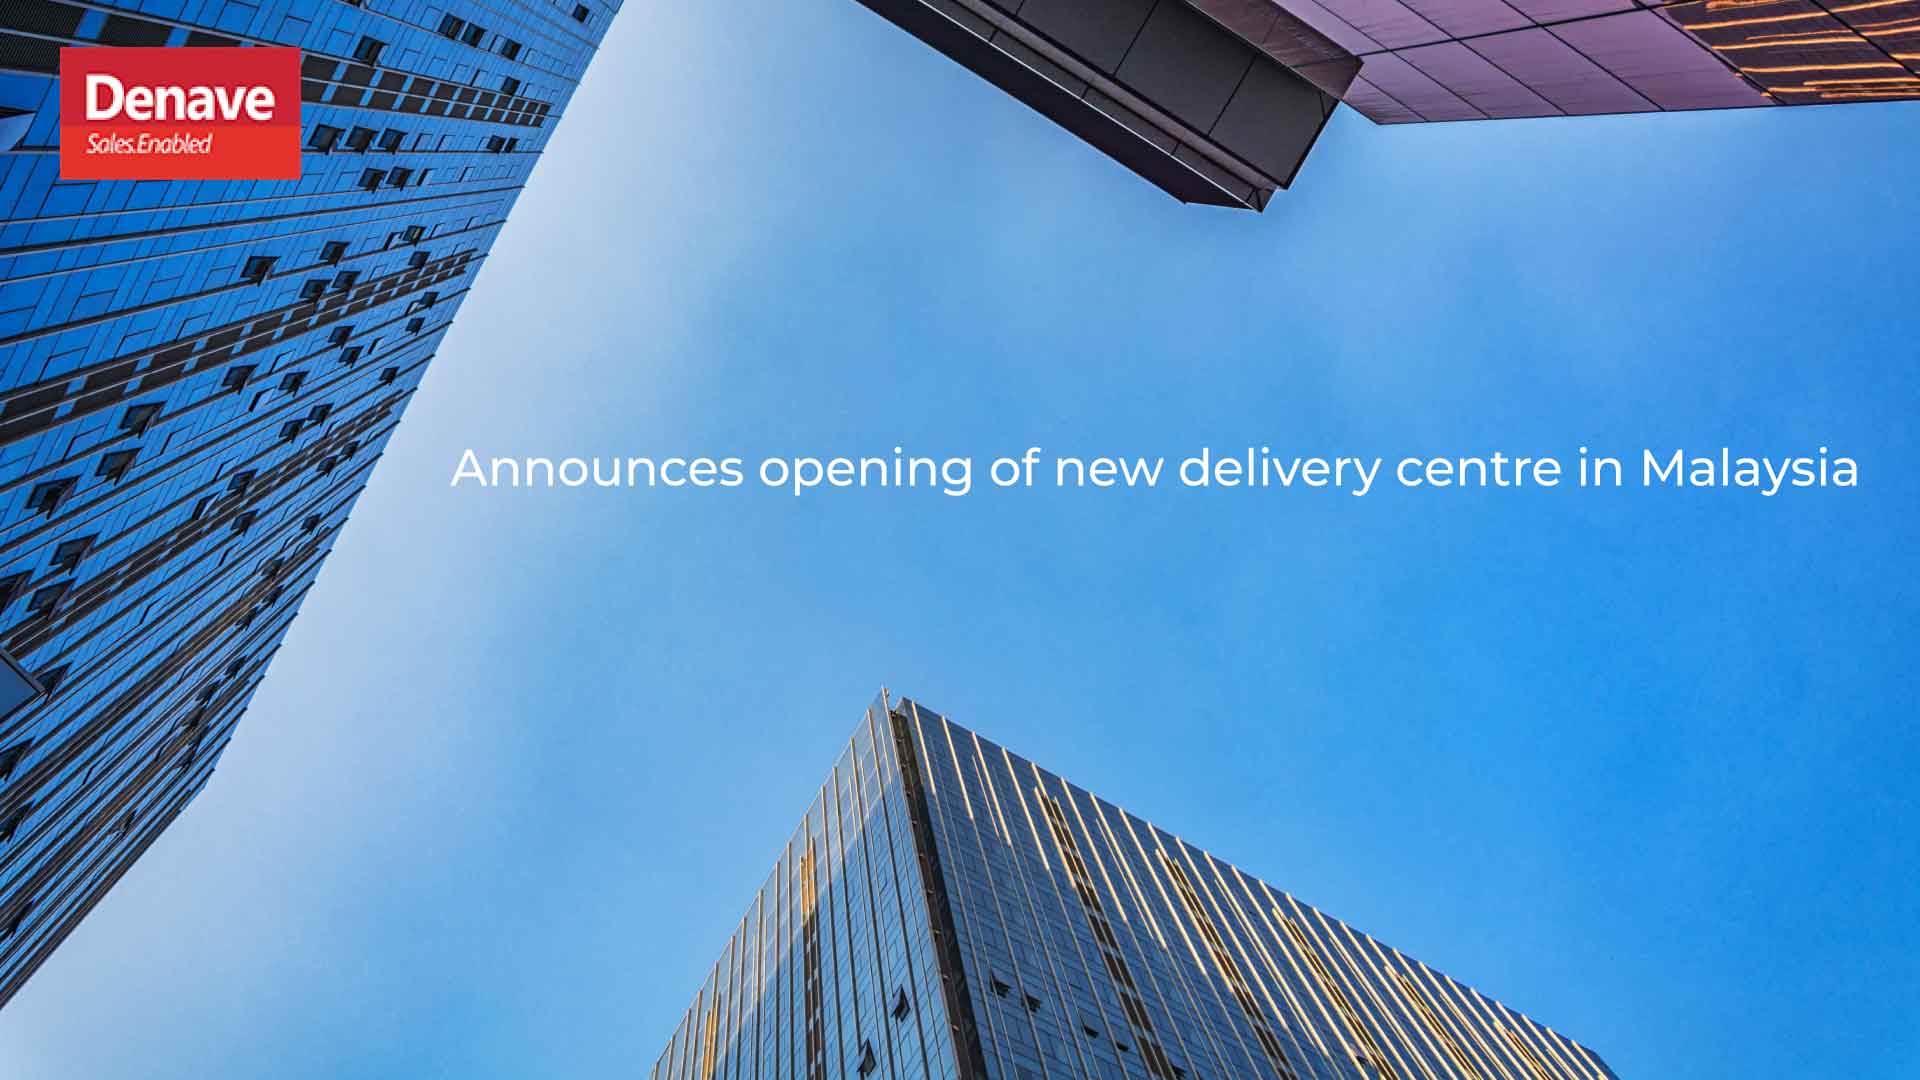 Denave Expands Global Footprint with New Delivery Center in Malaysia